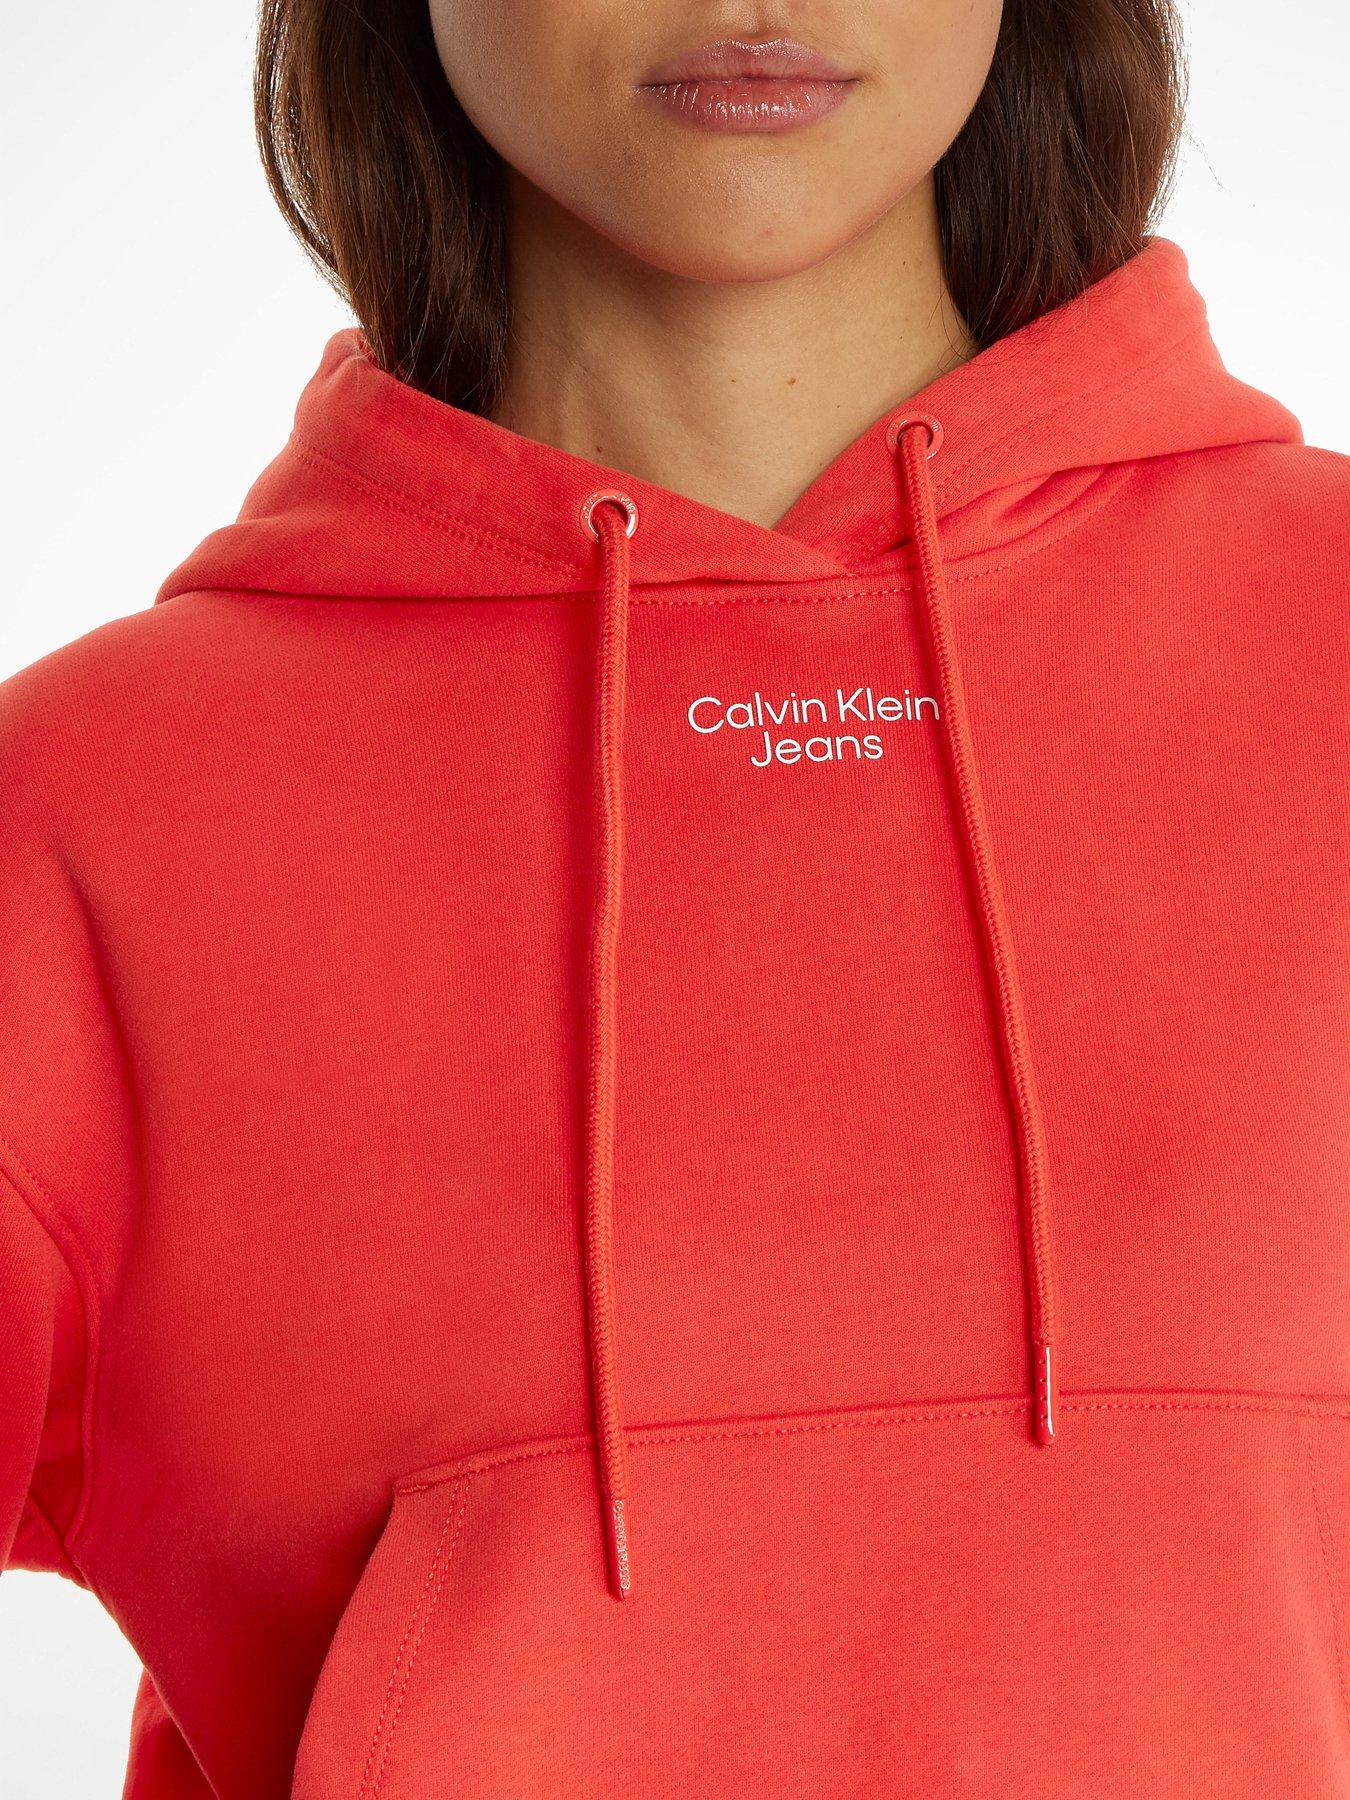 Calvin Klein Jeans Stacked Logo Hoodie - Red 